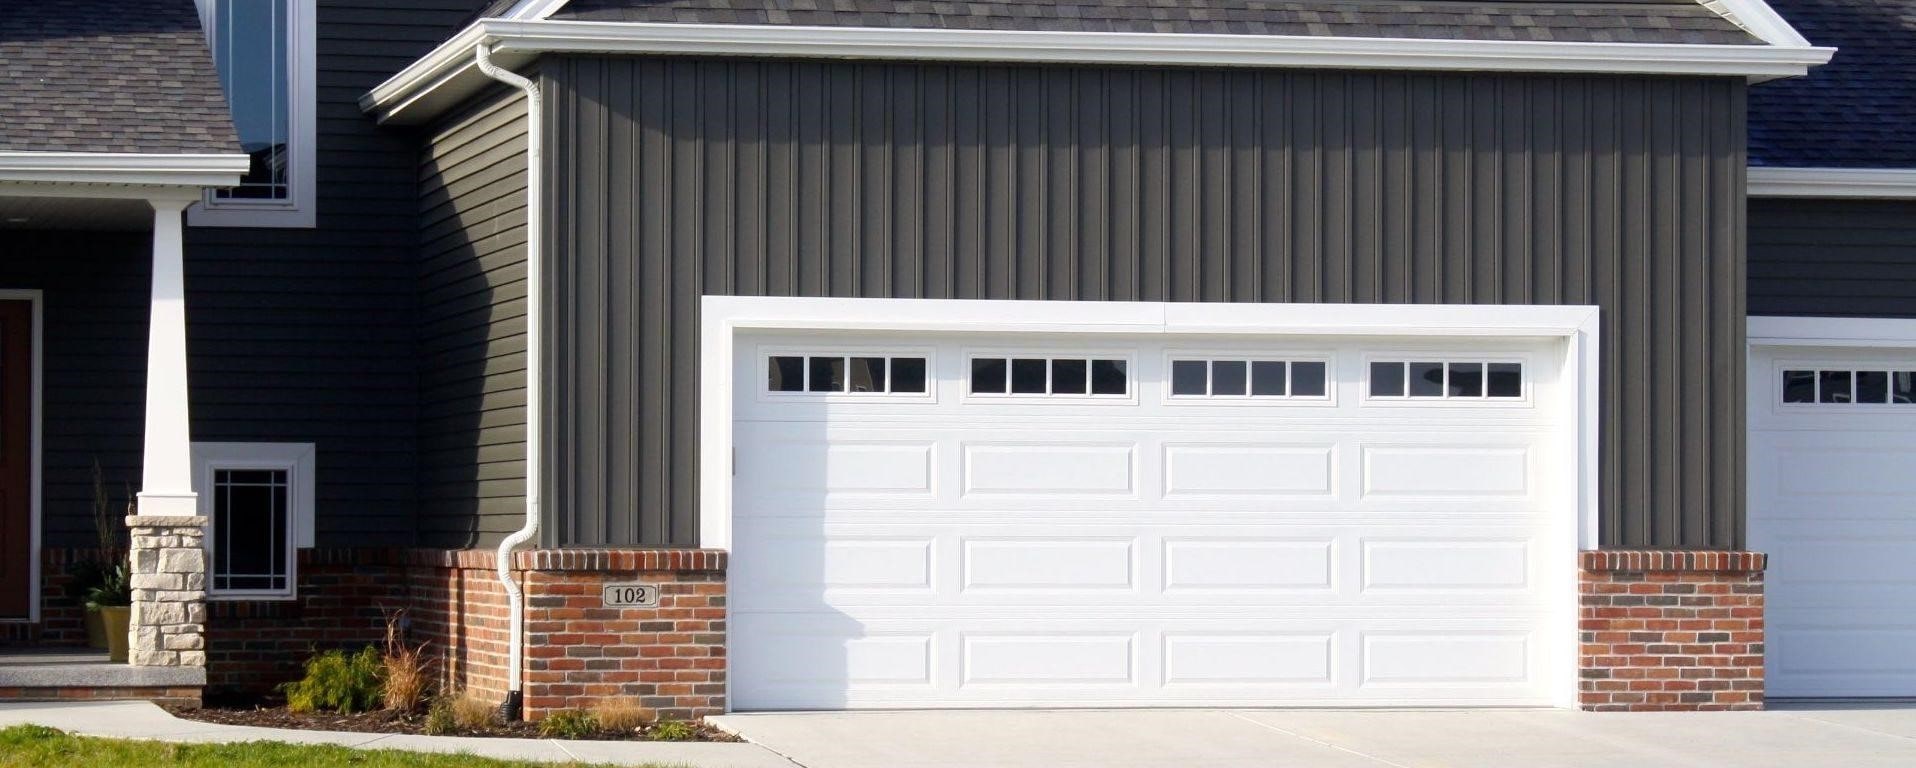 Enhance Your Home's Security with Professional Garage Door Services